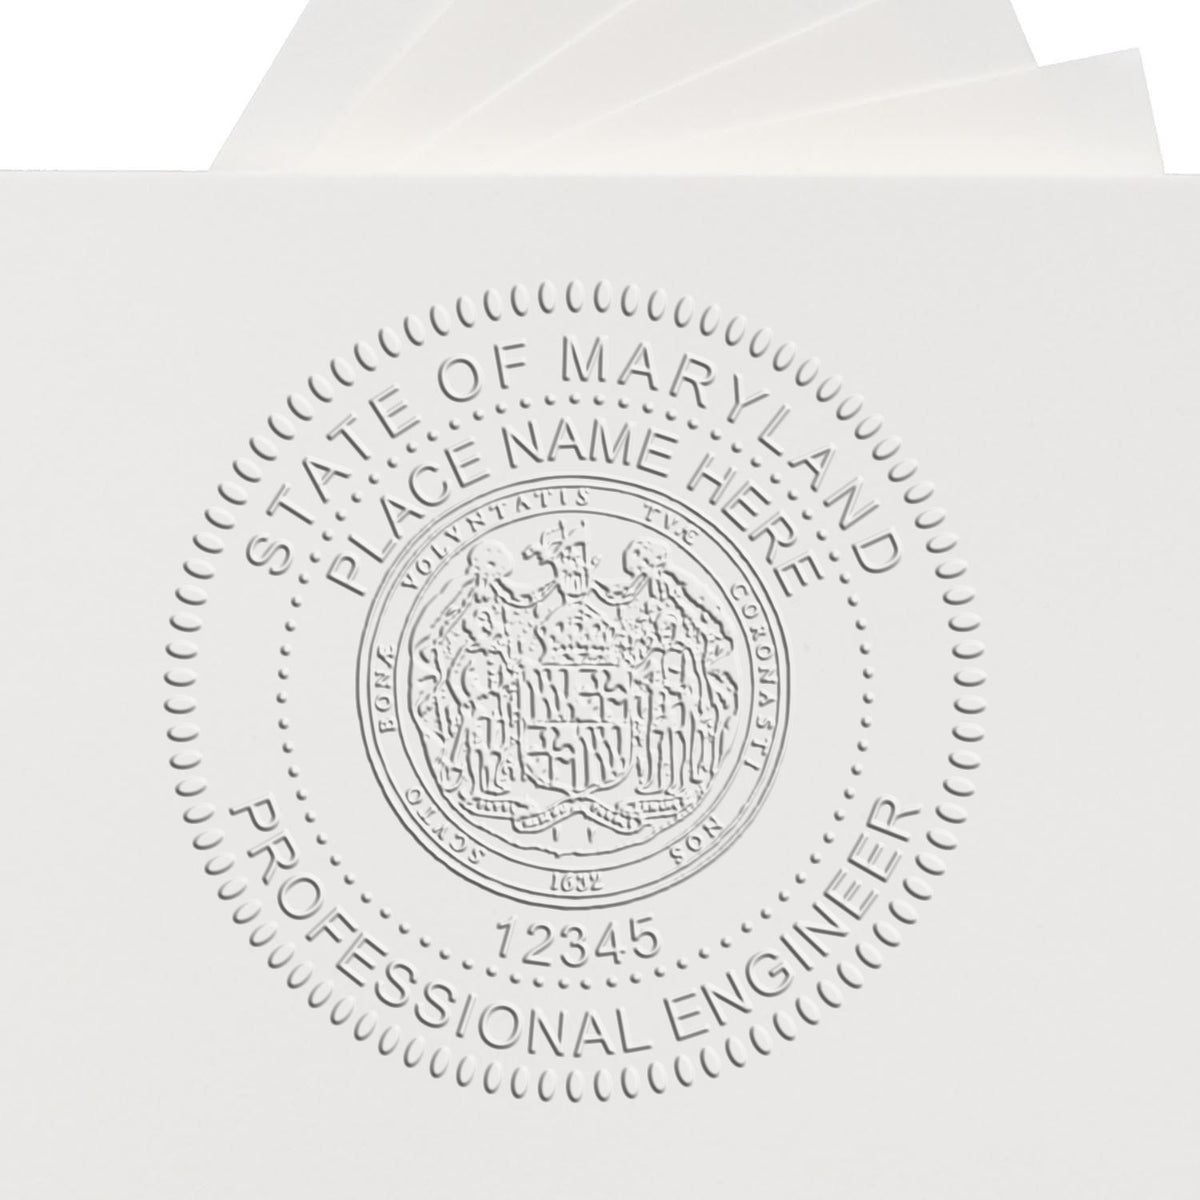 An alternative view of the Heavy Duty Cast Iron Maryland Engineer Seal Embosser stamped on a sheet of paper showing the image in use